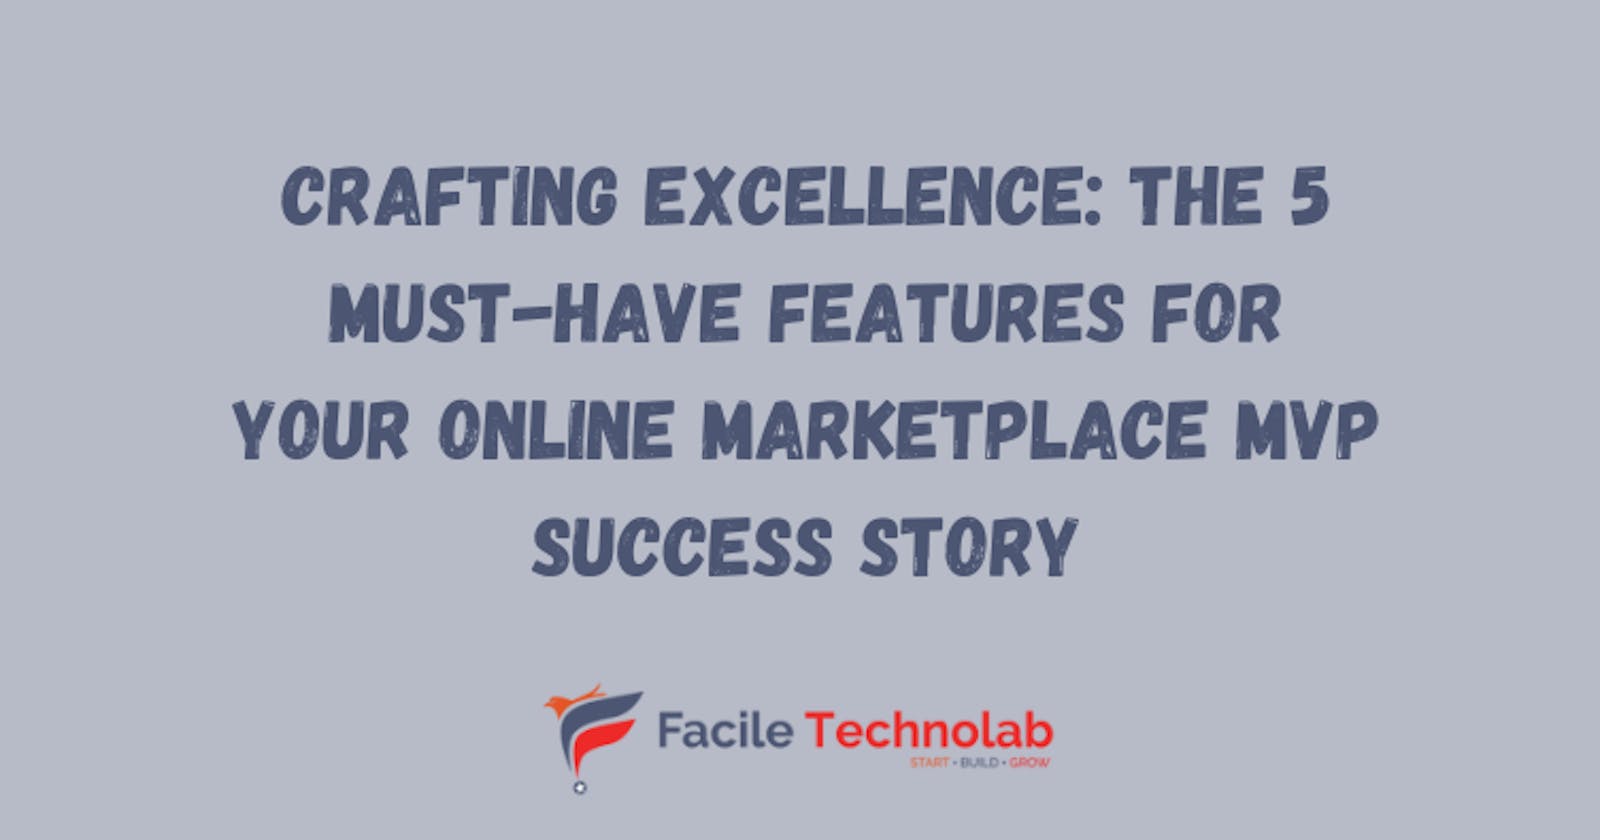 Crafting Excellence: The 5 Must-Have Features for Your Online Marketplace MVP Success Story